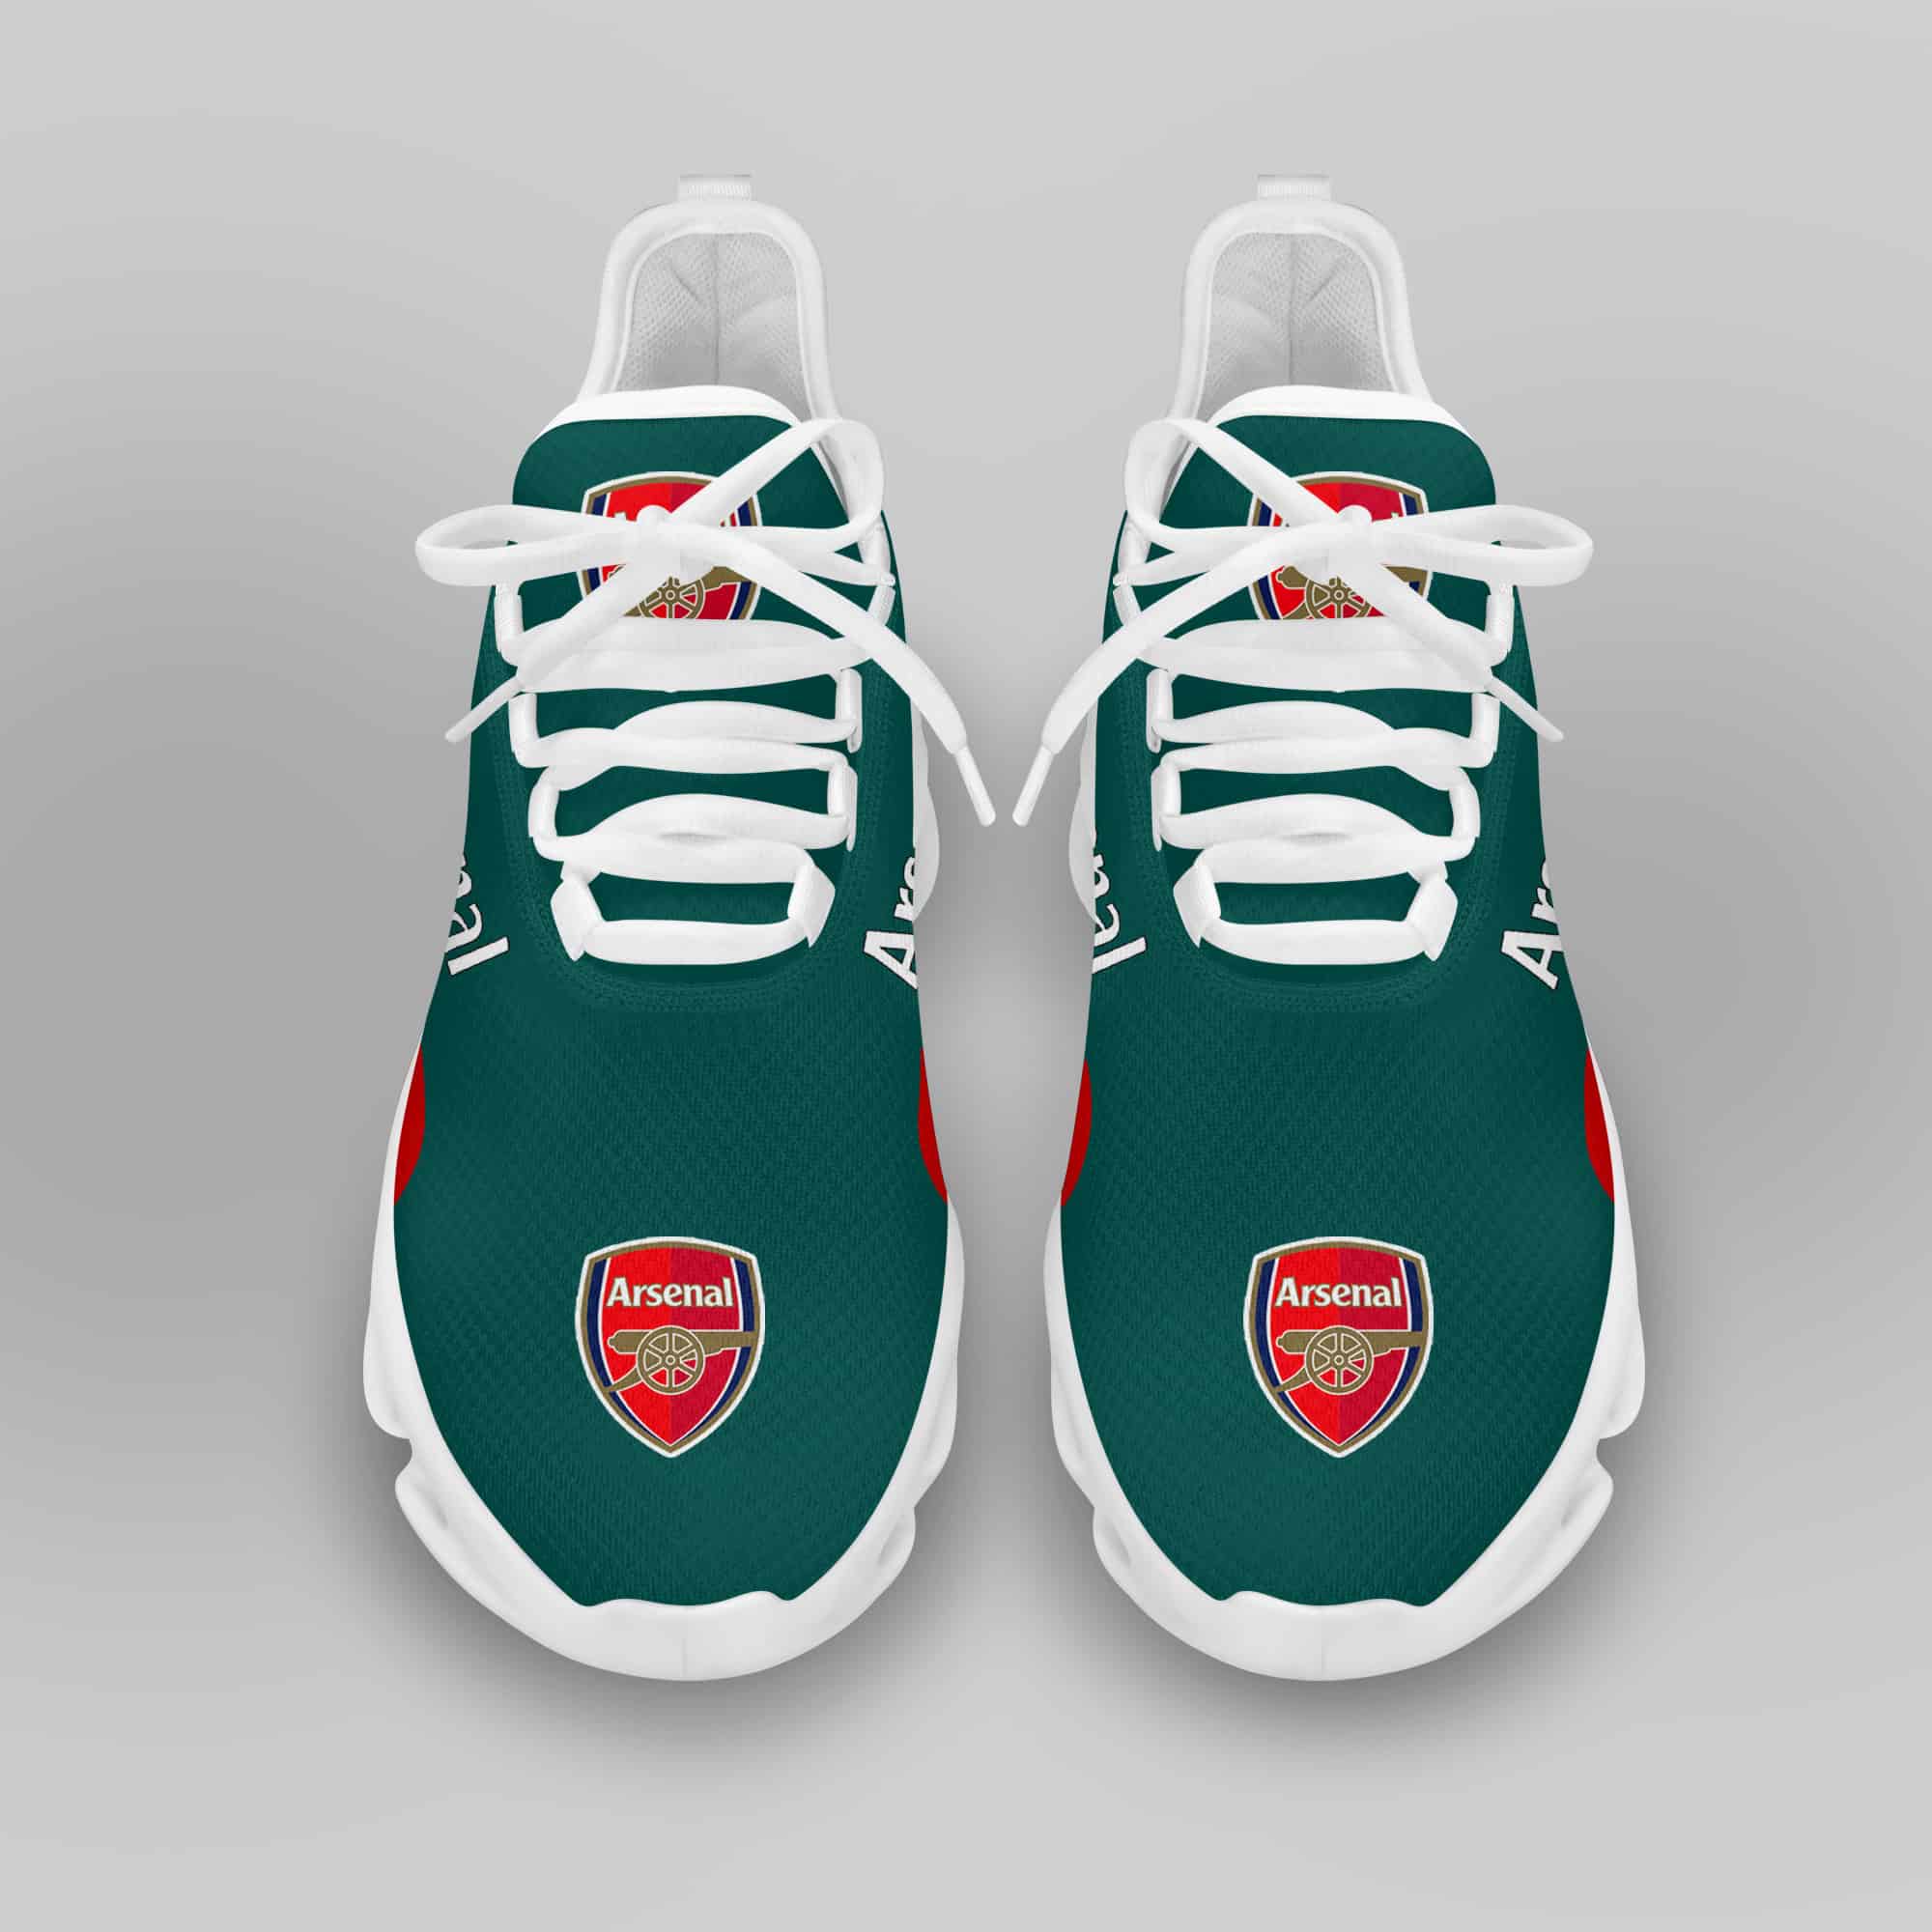 Arsenal Running Shoes Max Soul Shoes Sneakers Ver 5 3